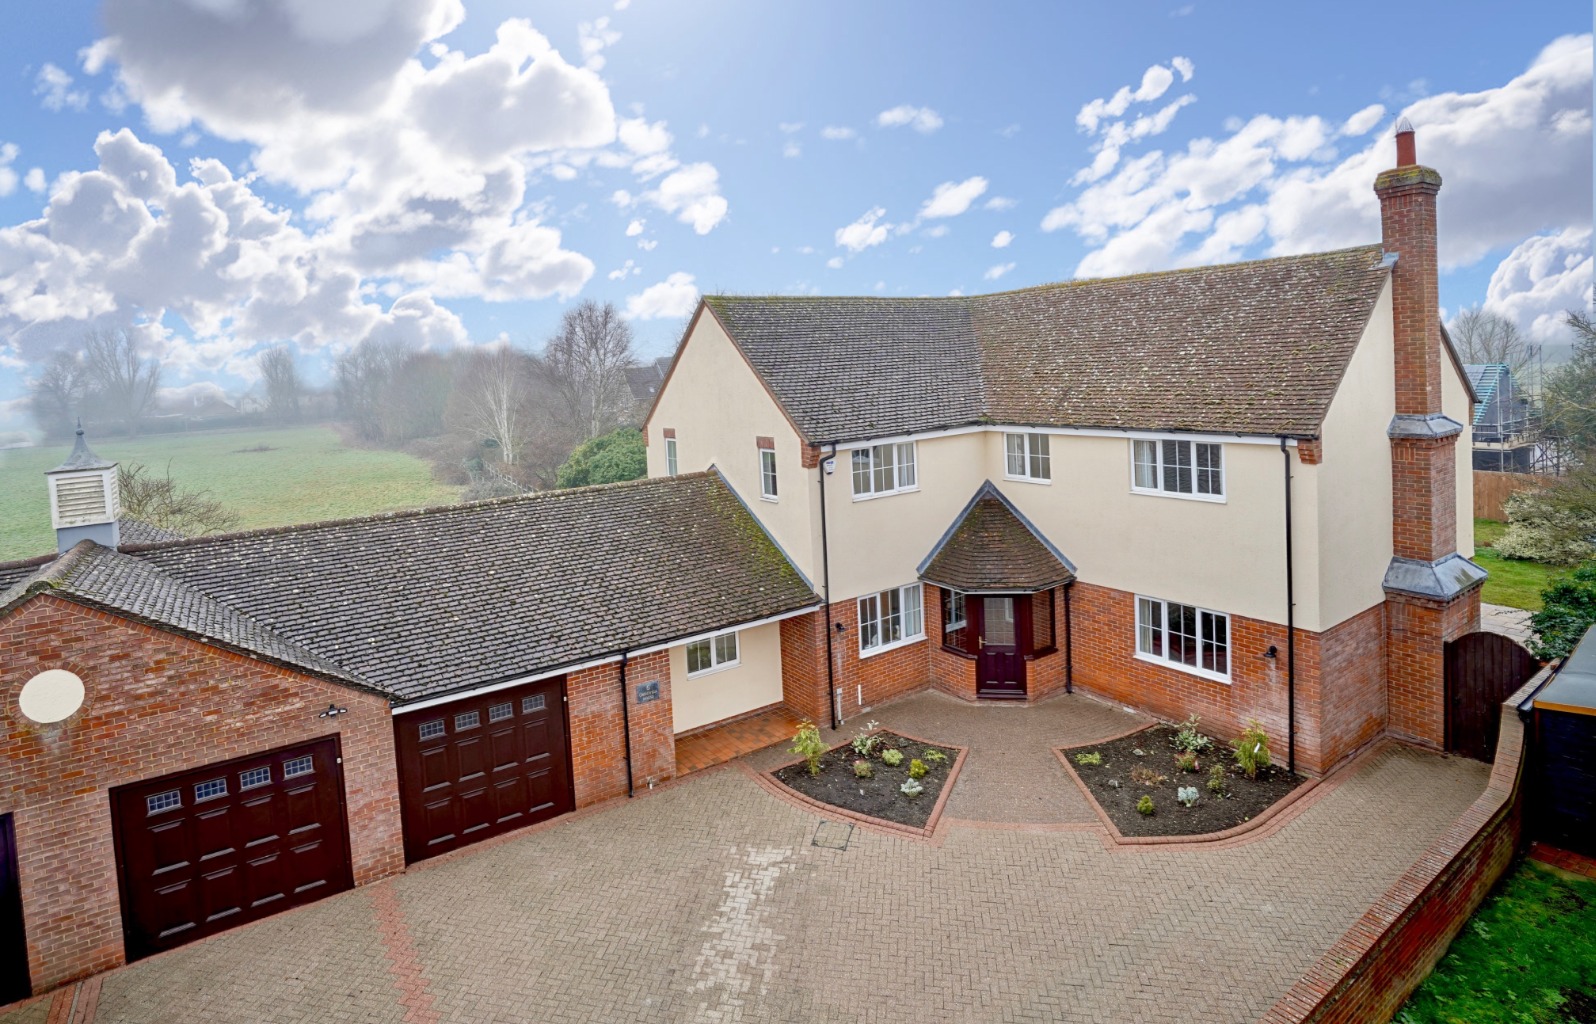 4 bed detached house for sale in The Gables, Huntingdon - Property Image 1